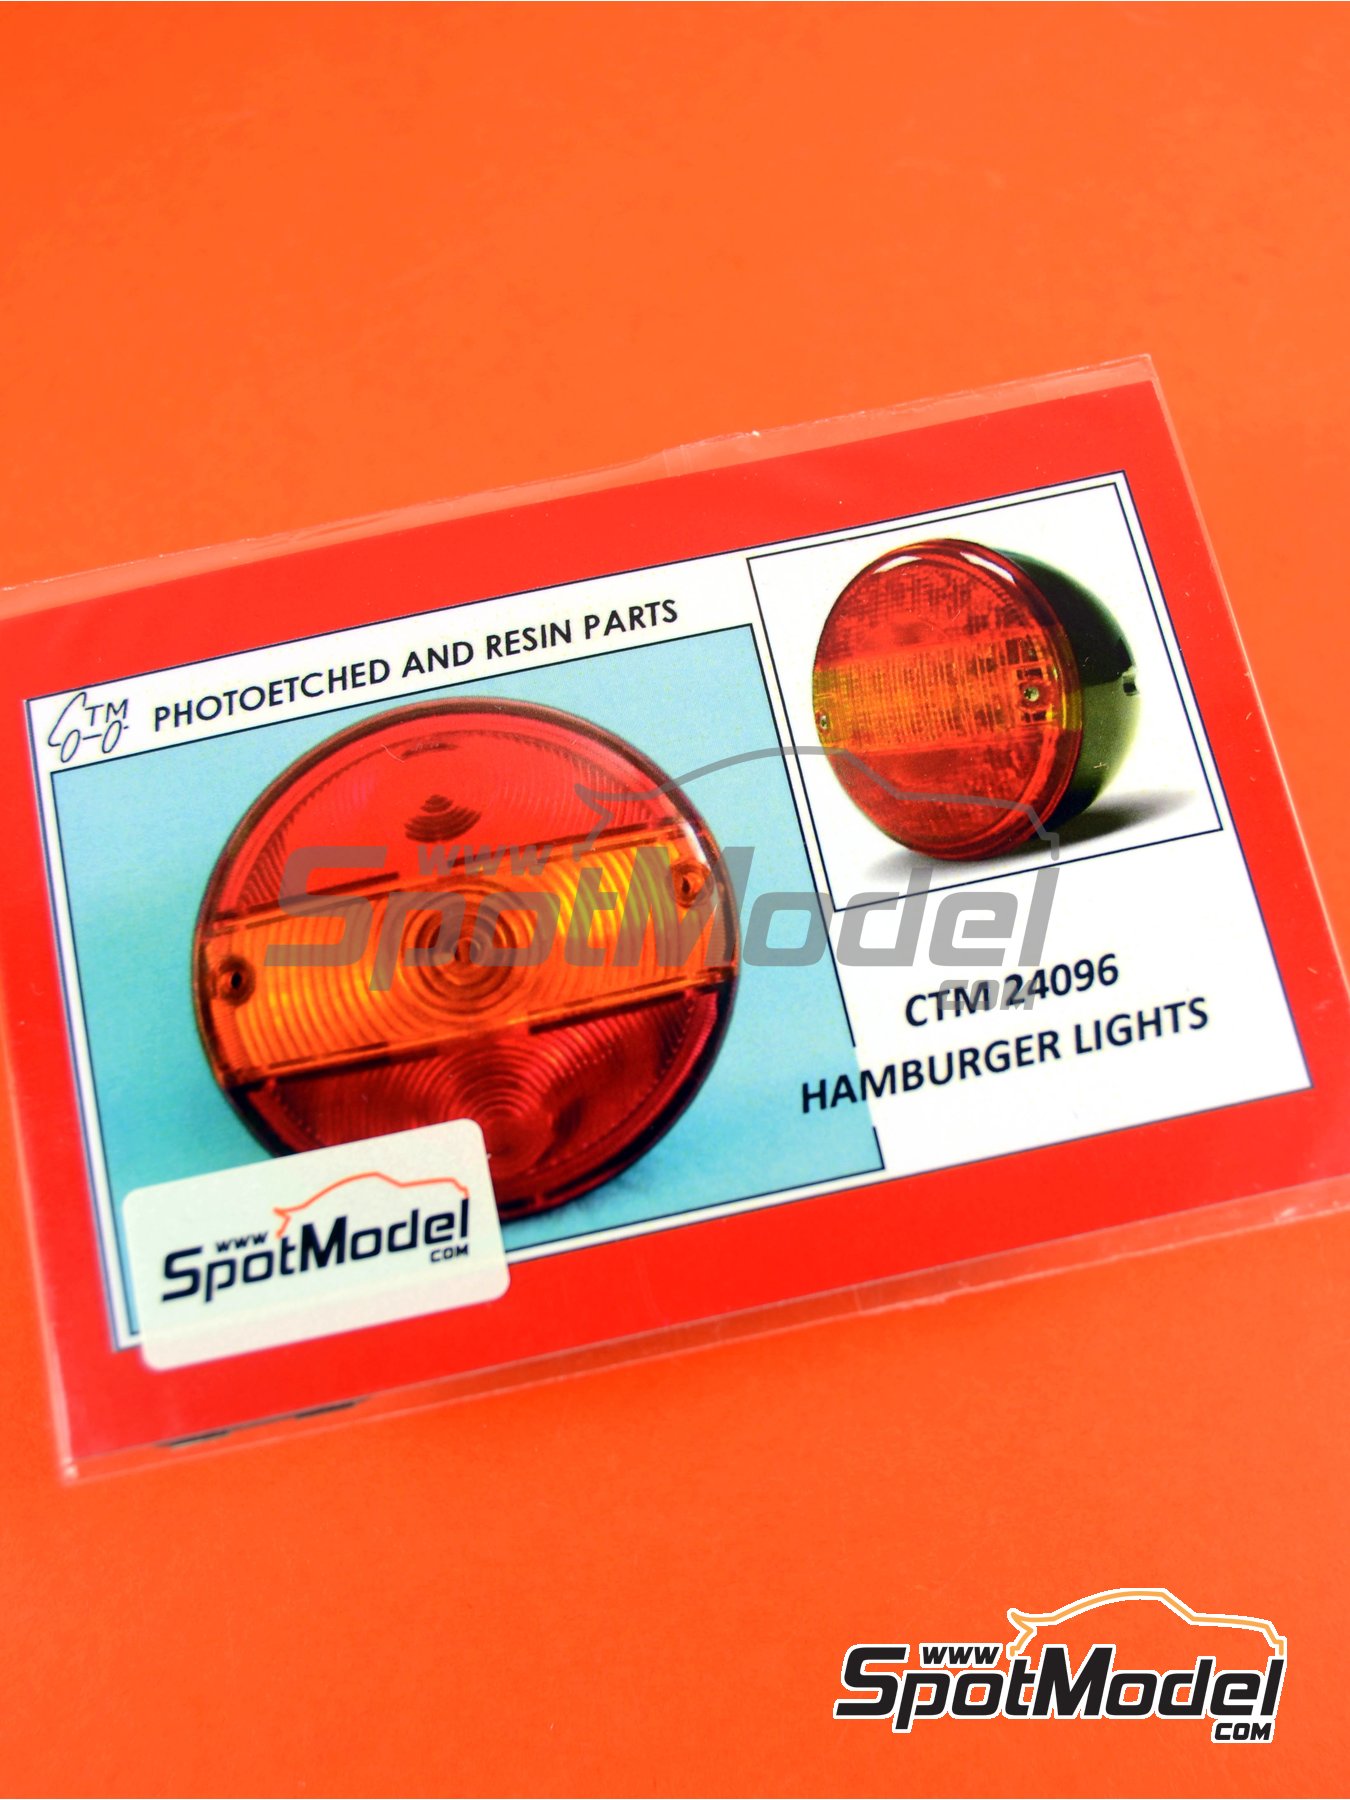 TAIL LIGHTS AND HAMBURGER LAMPS PHOTOETCHED   1/25